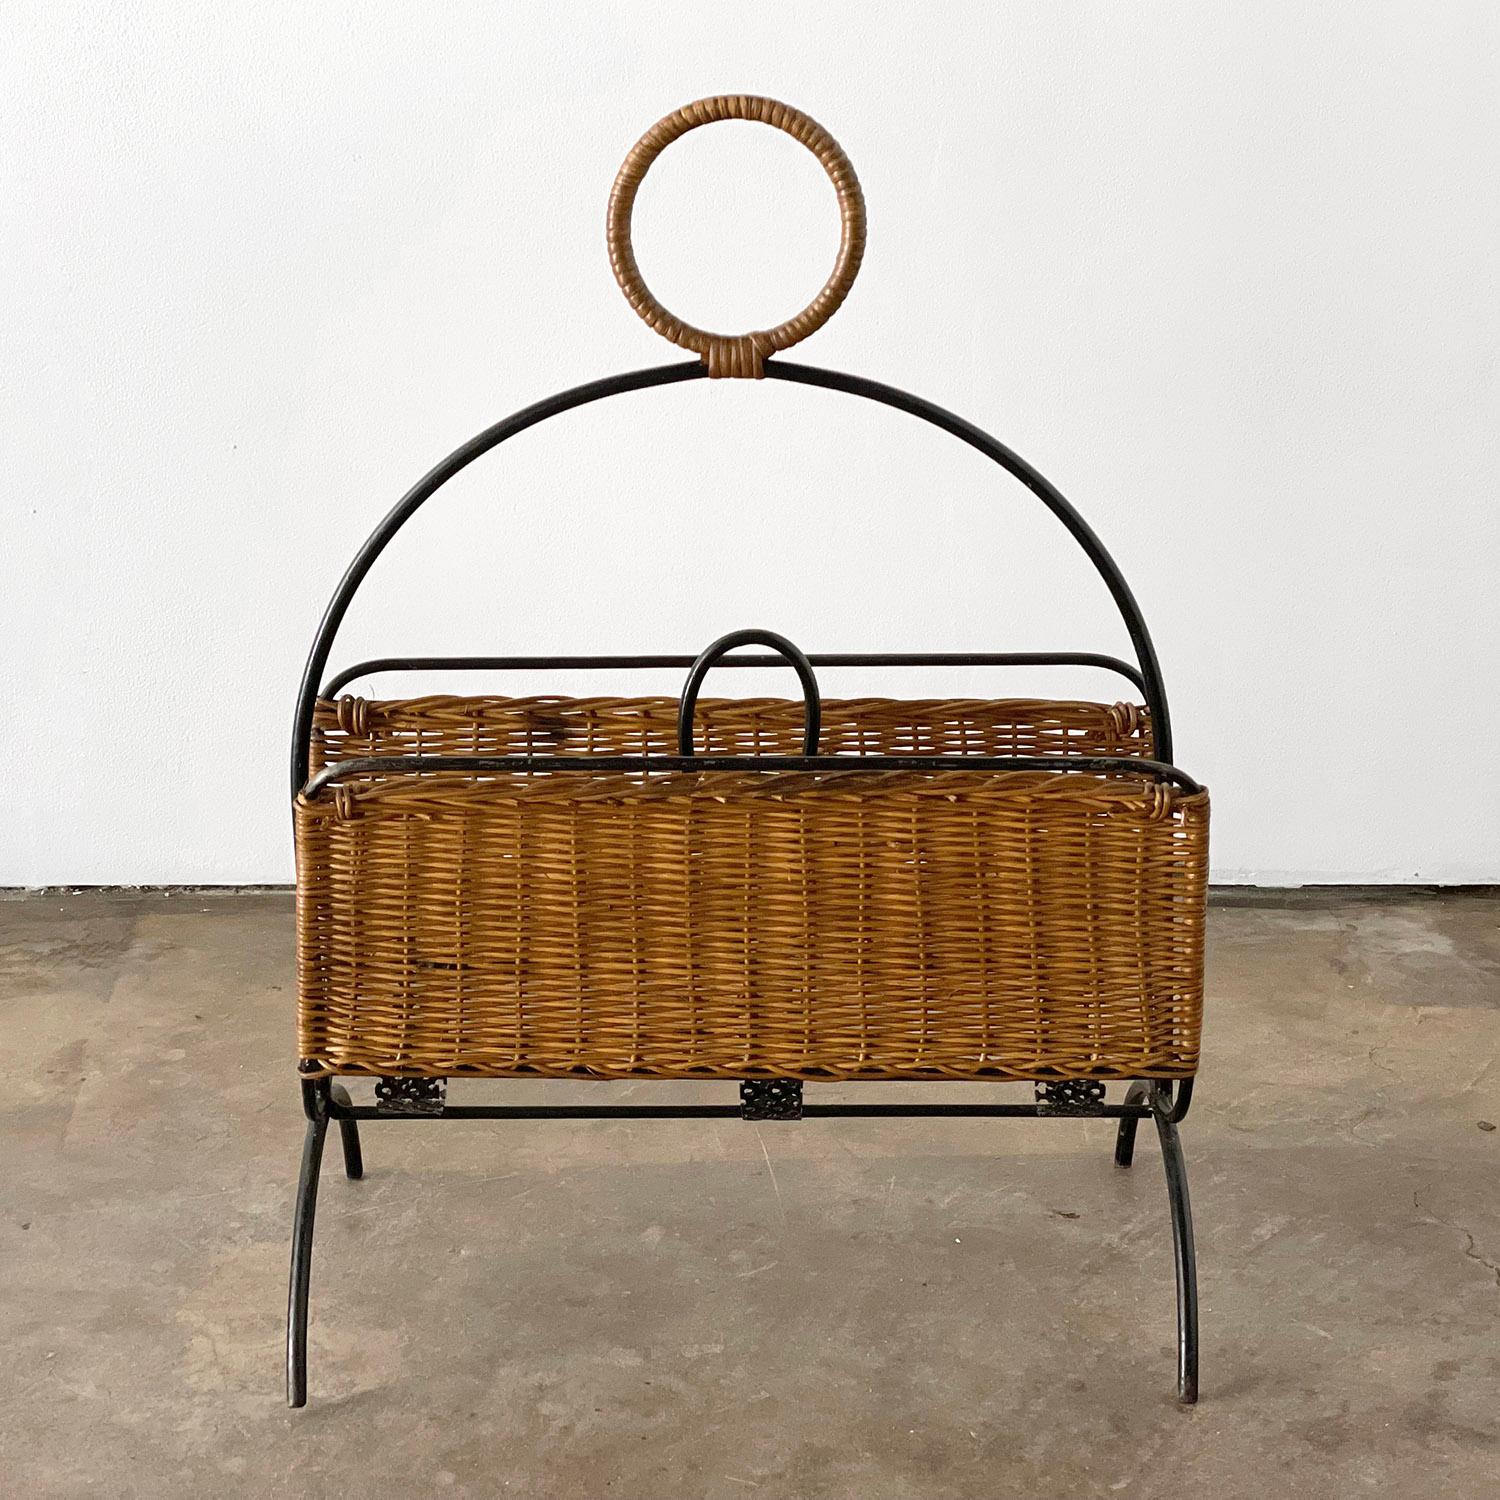 Mathieu Matégot wicker and iron magazine rack
Hand woven handle
Signature perforated metal detail
Sculptural design
Natural color variations in the wicker
Patina from age and use
Newly reconditioned.